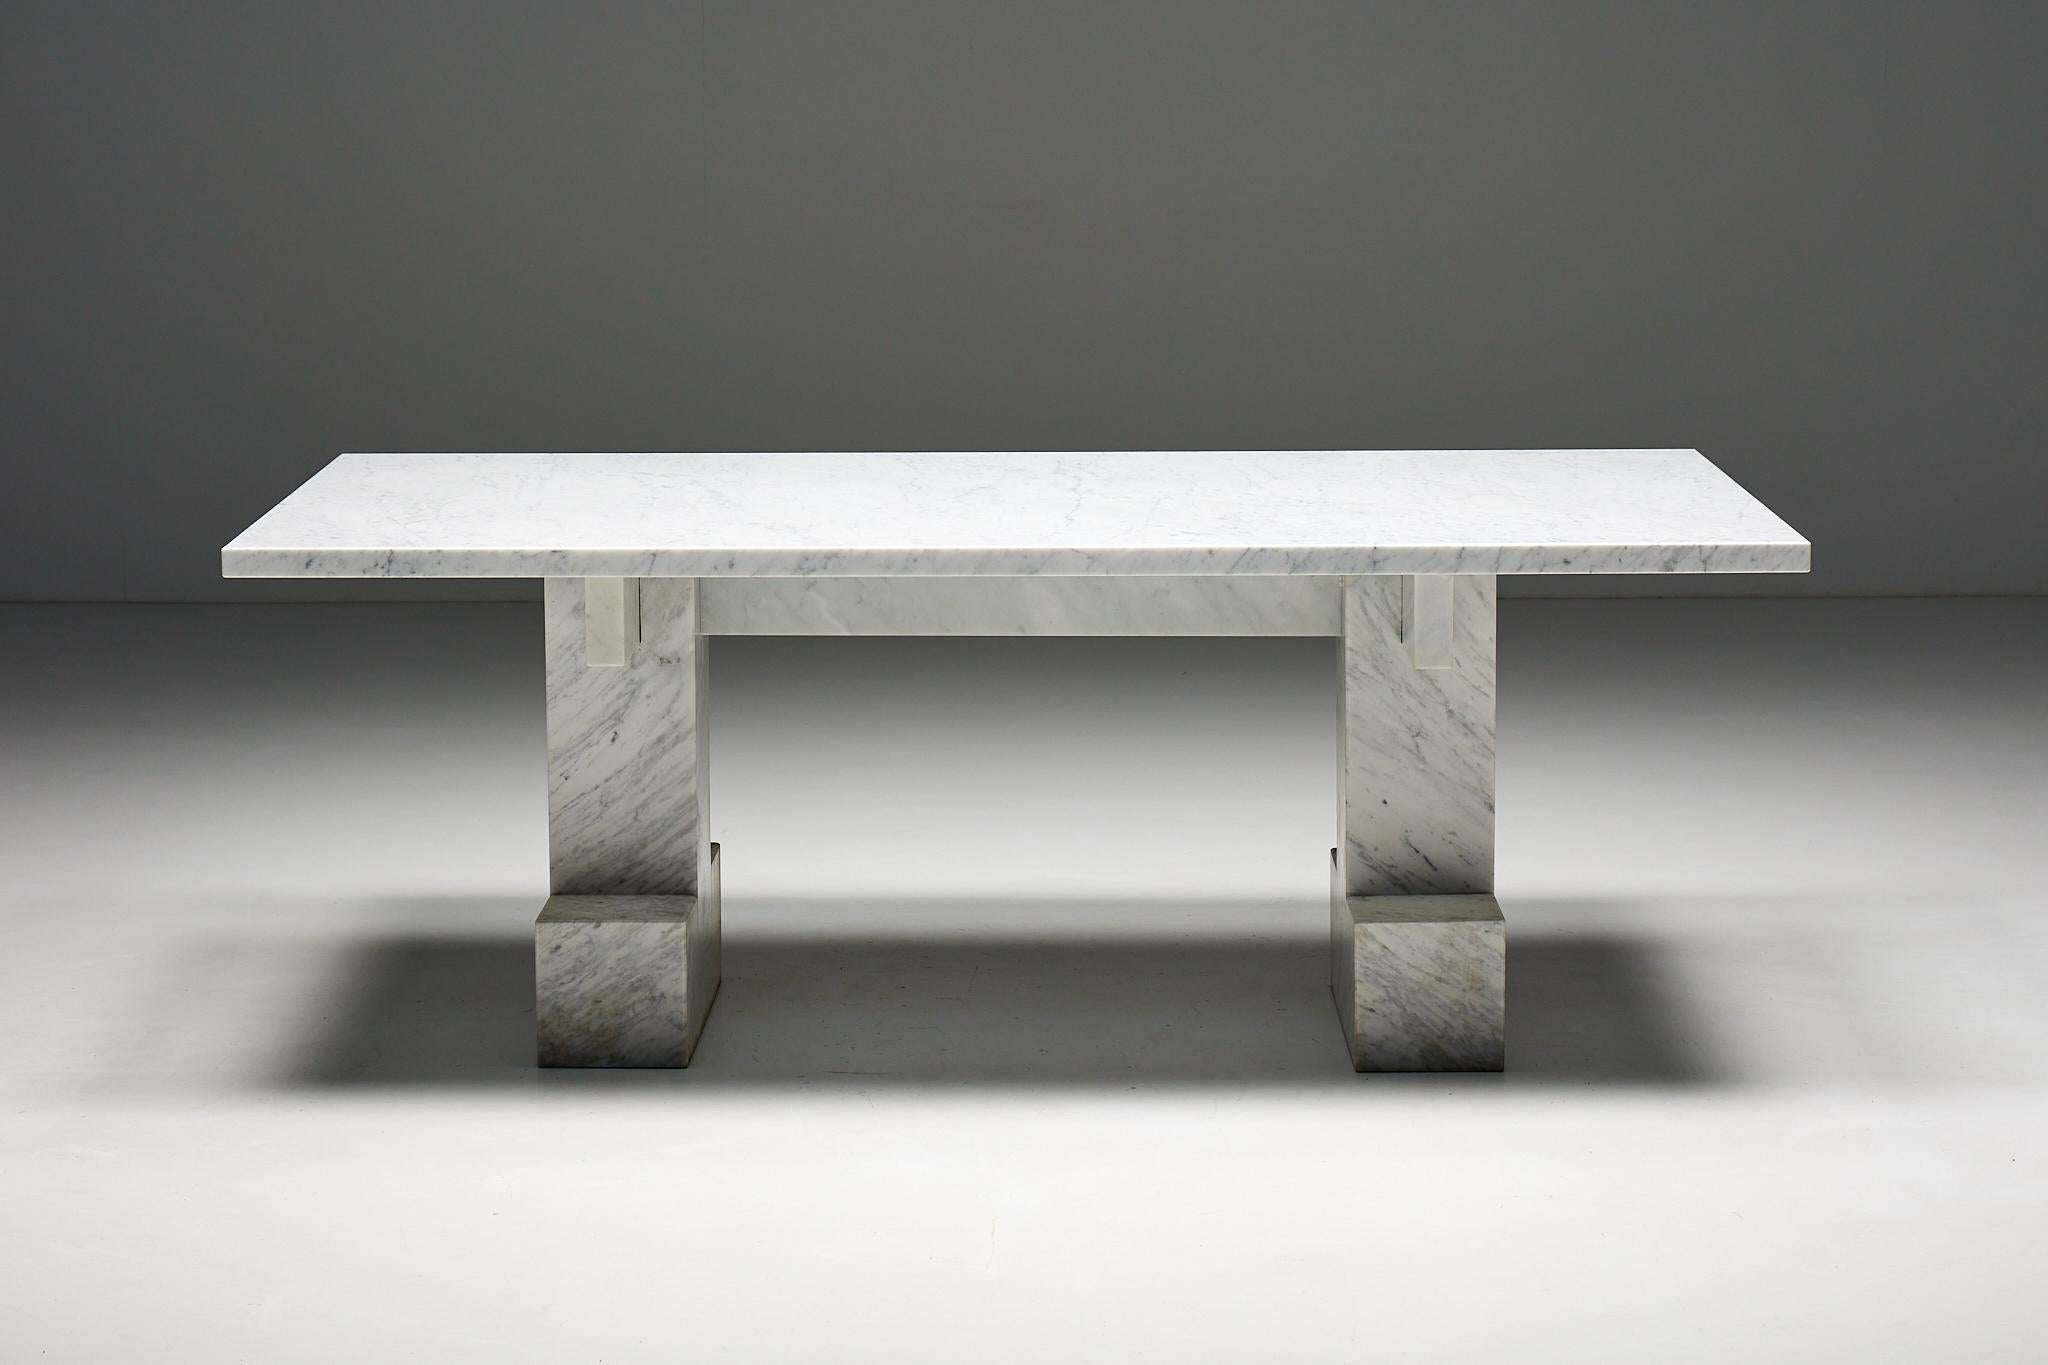 Carrera Marble; Brutalist; Italy; Architect's Edition; 1970s; Table; Postmodernism; 

Carrera marble table, crafted in Italy during the iconic 1970s era. This remarkable piece showcases sturdy legs and a luxurious 4 cm thick tabletop, exuding a